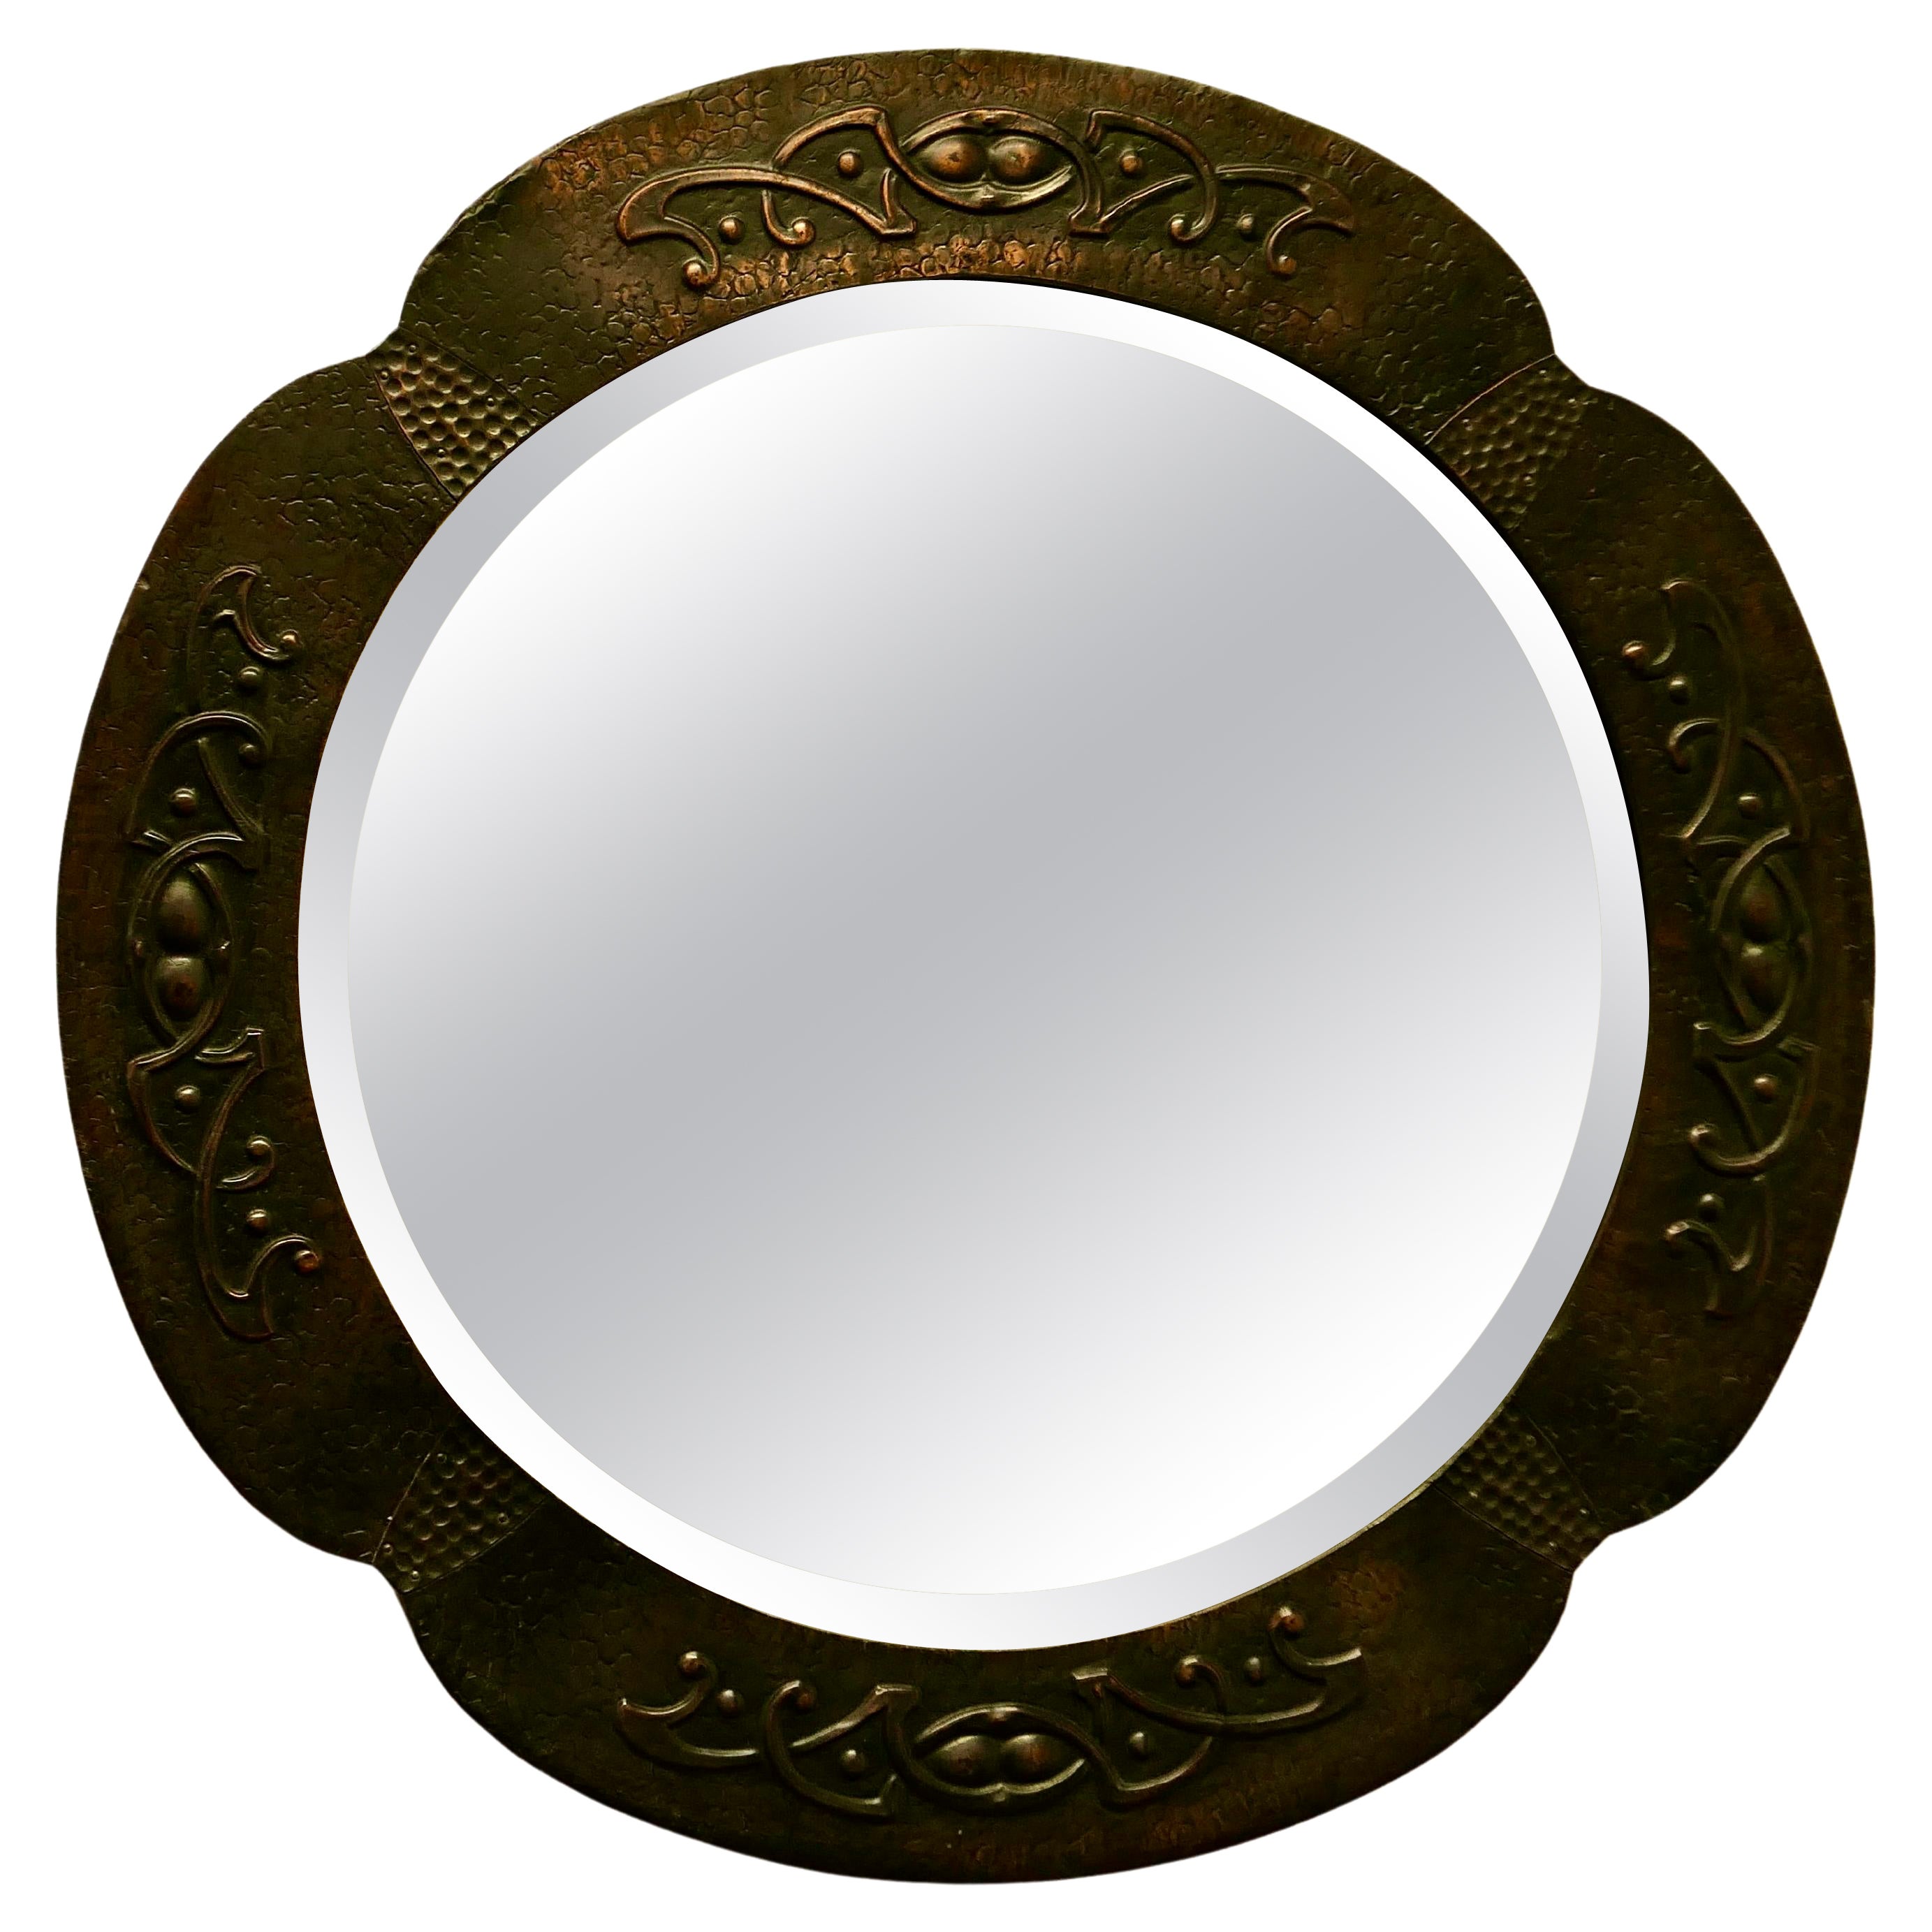 Beautiful Art Nouveau Round Copper Wall Mirror For Sale